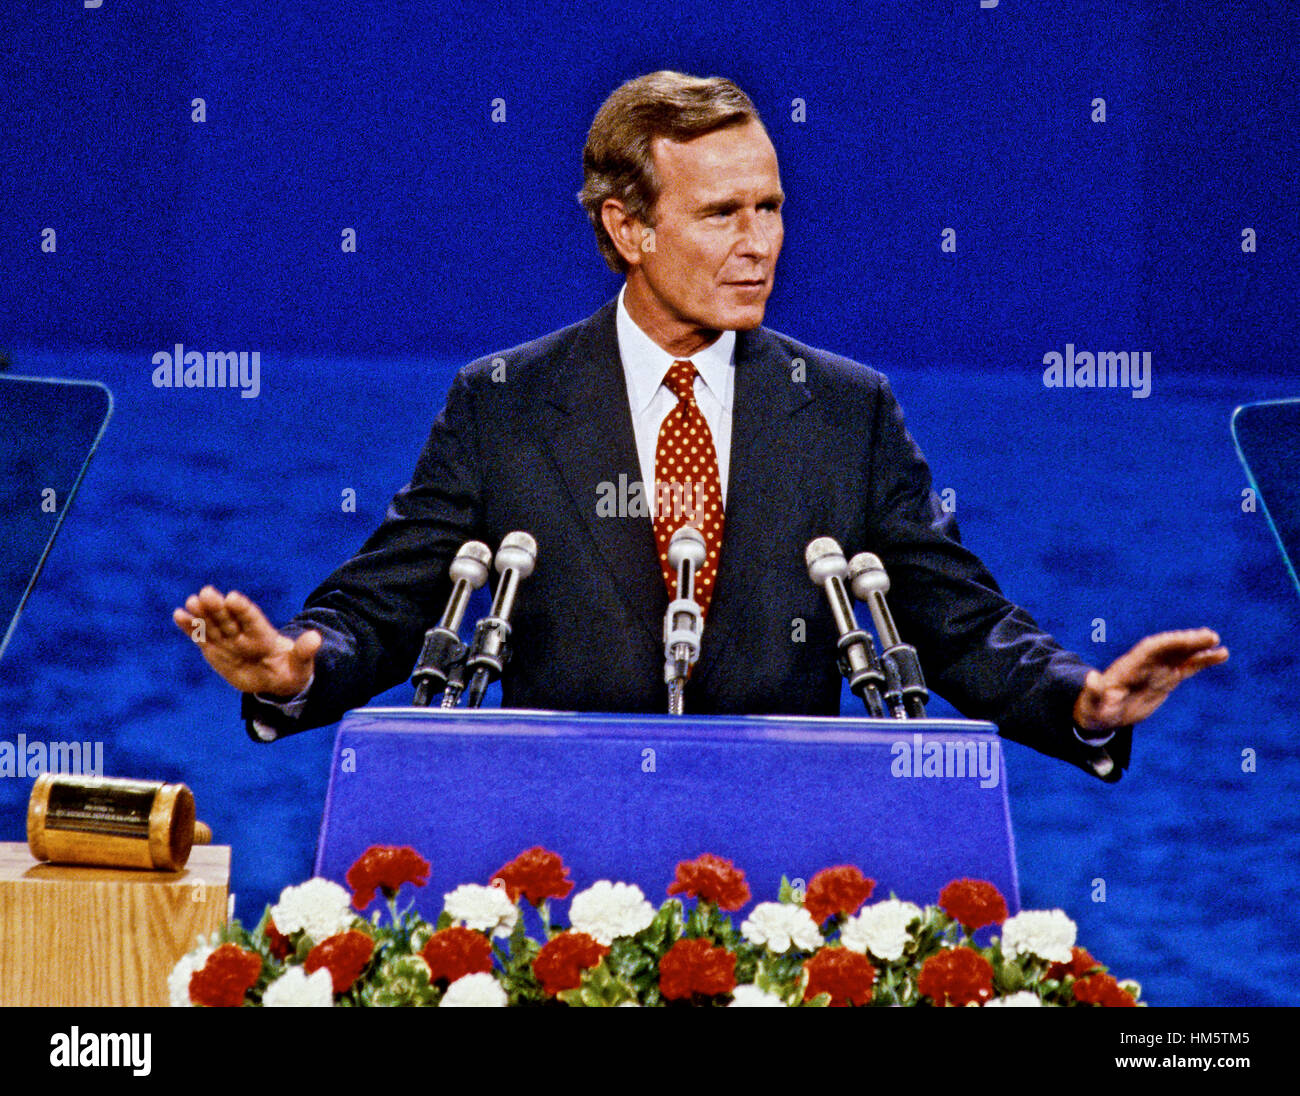 George H.W. Bush, former United States Ambassador to the United Nations, accepts the nomination of the Republican Party to be its candidate for Vice President of the United States at the Joe Lewis Arena in Detroit, Michigan on July 17, 1980. Stock Photo